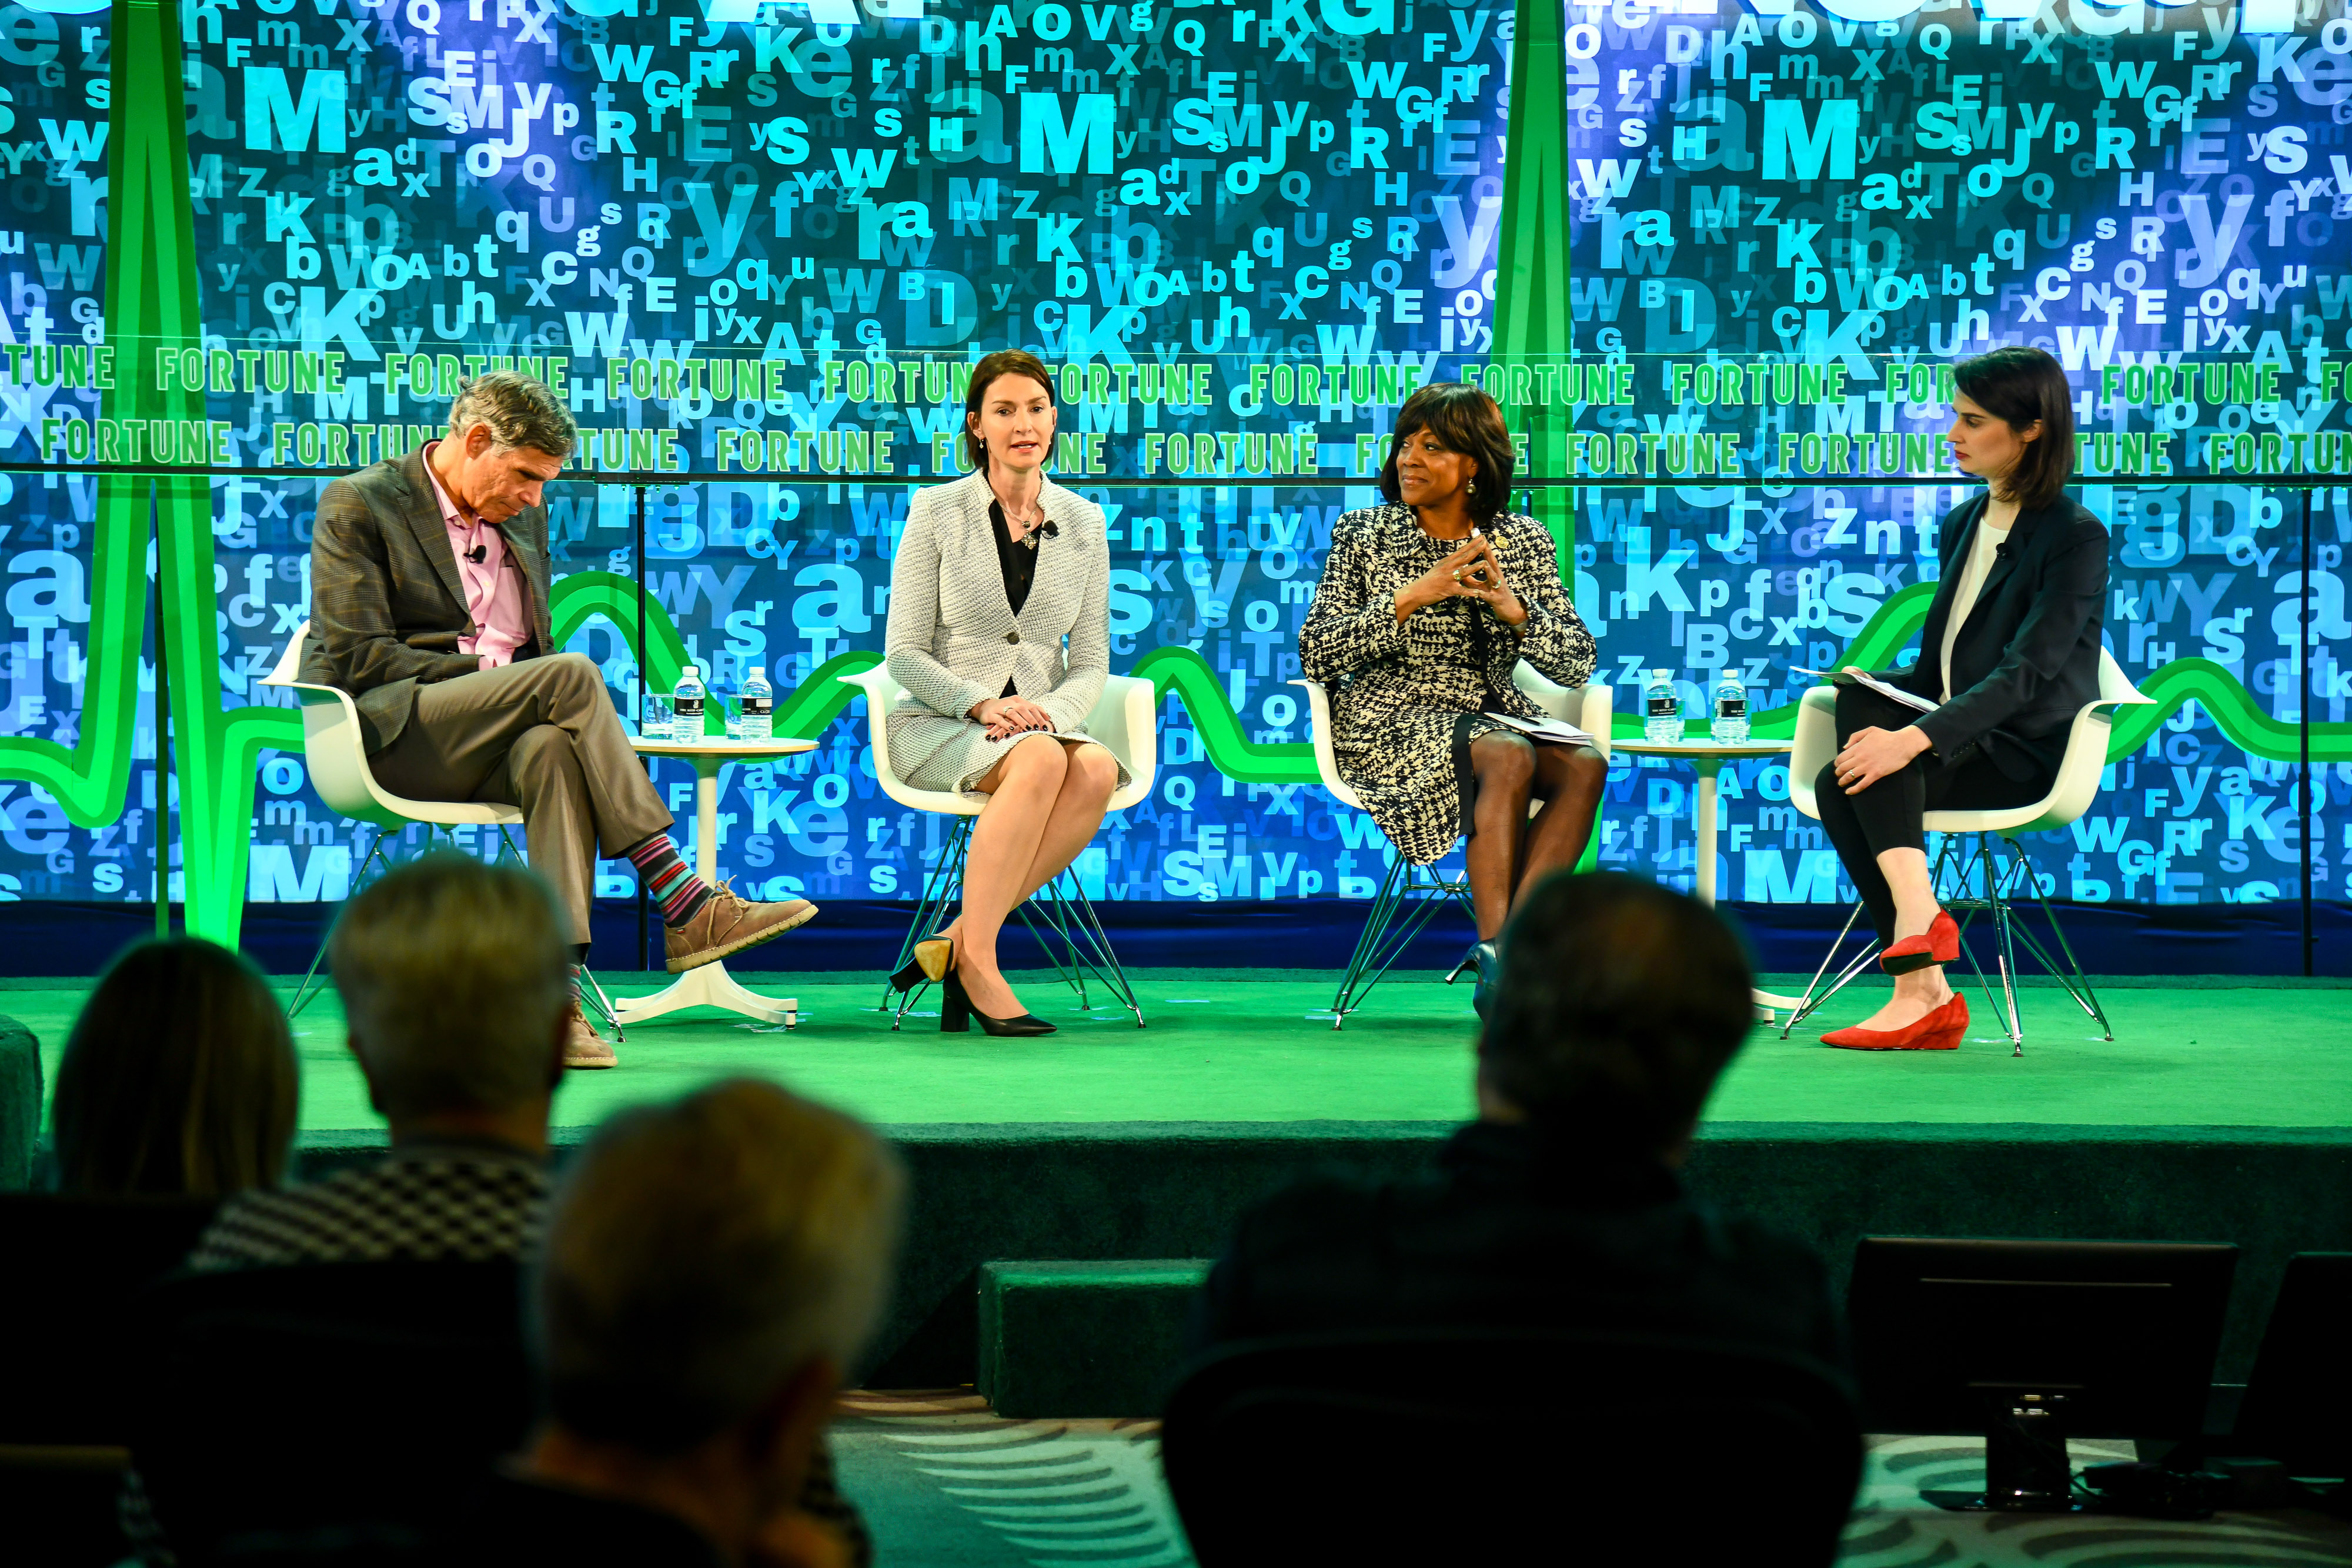 Dr. Eric Topol, Founder and Director, Scripps Translational Science Institute, Christi Shaw, President, Lilly Bio-Medicines, Dr. Valerie Montgomery Rice, President and Dean, Morehouse School of Medicine, and Beth Kowitt, Senior Writer and Co-chair, MPW Next Gen, Fortune at Fortune Brainstorm Health 2018. (Photograph by Stuart Isett for F&mdash;Photograph by Stuart Isett for F)